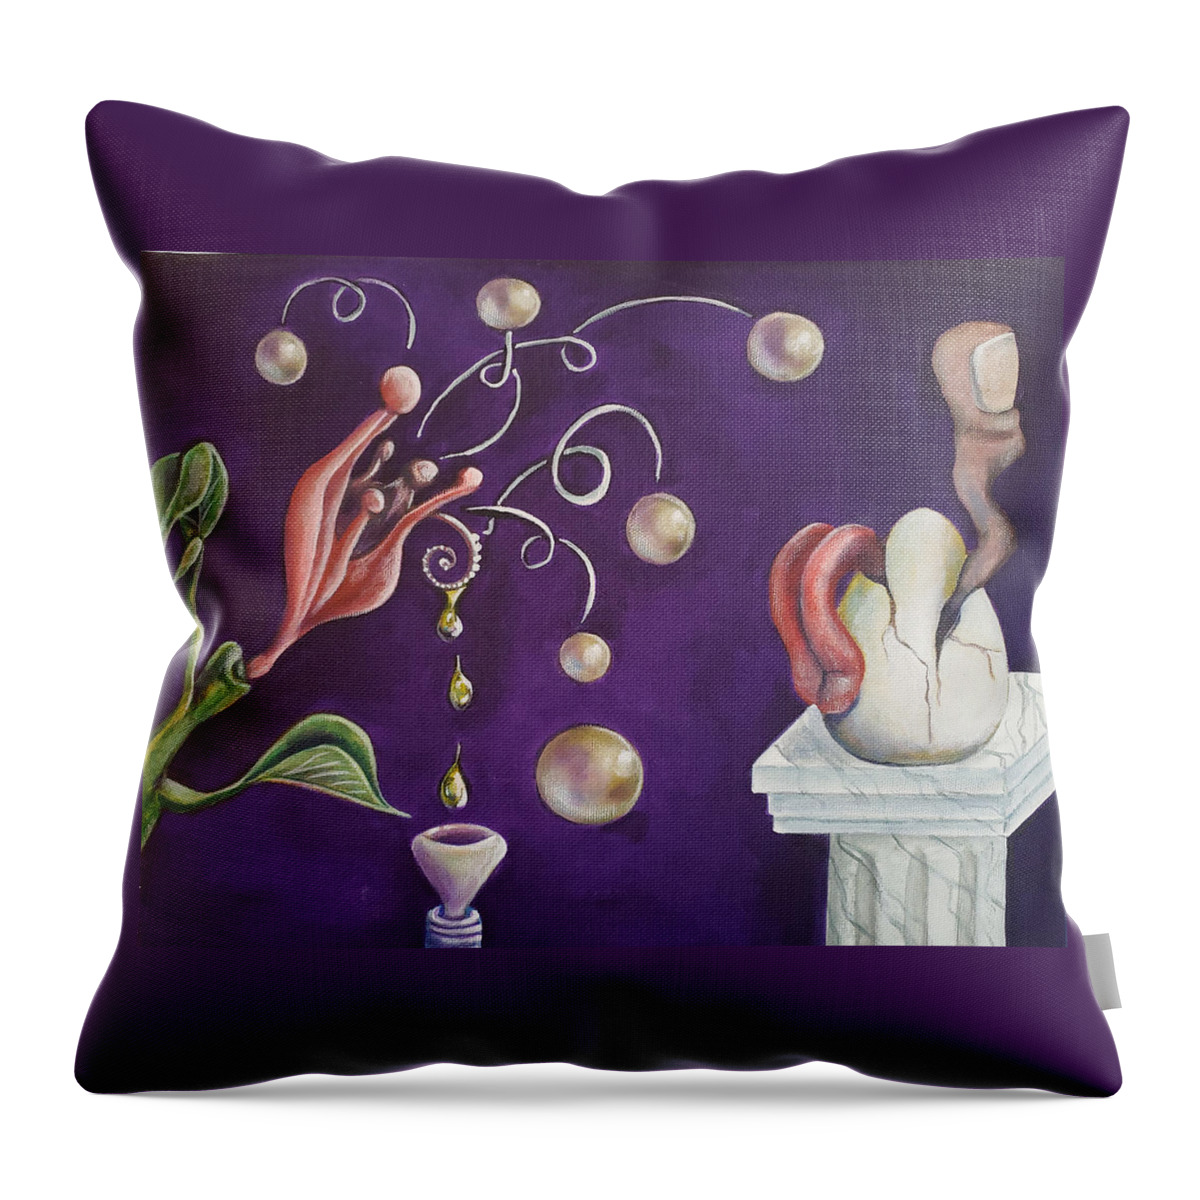 Thumb Throw Pillow featuring the painting Creative Mousetrap by Vicki Noble